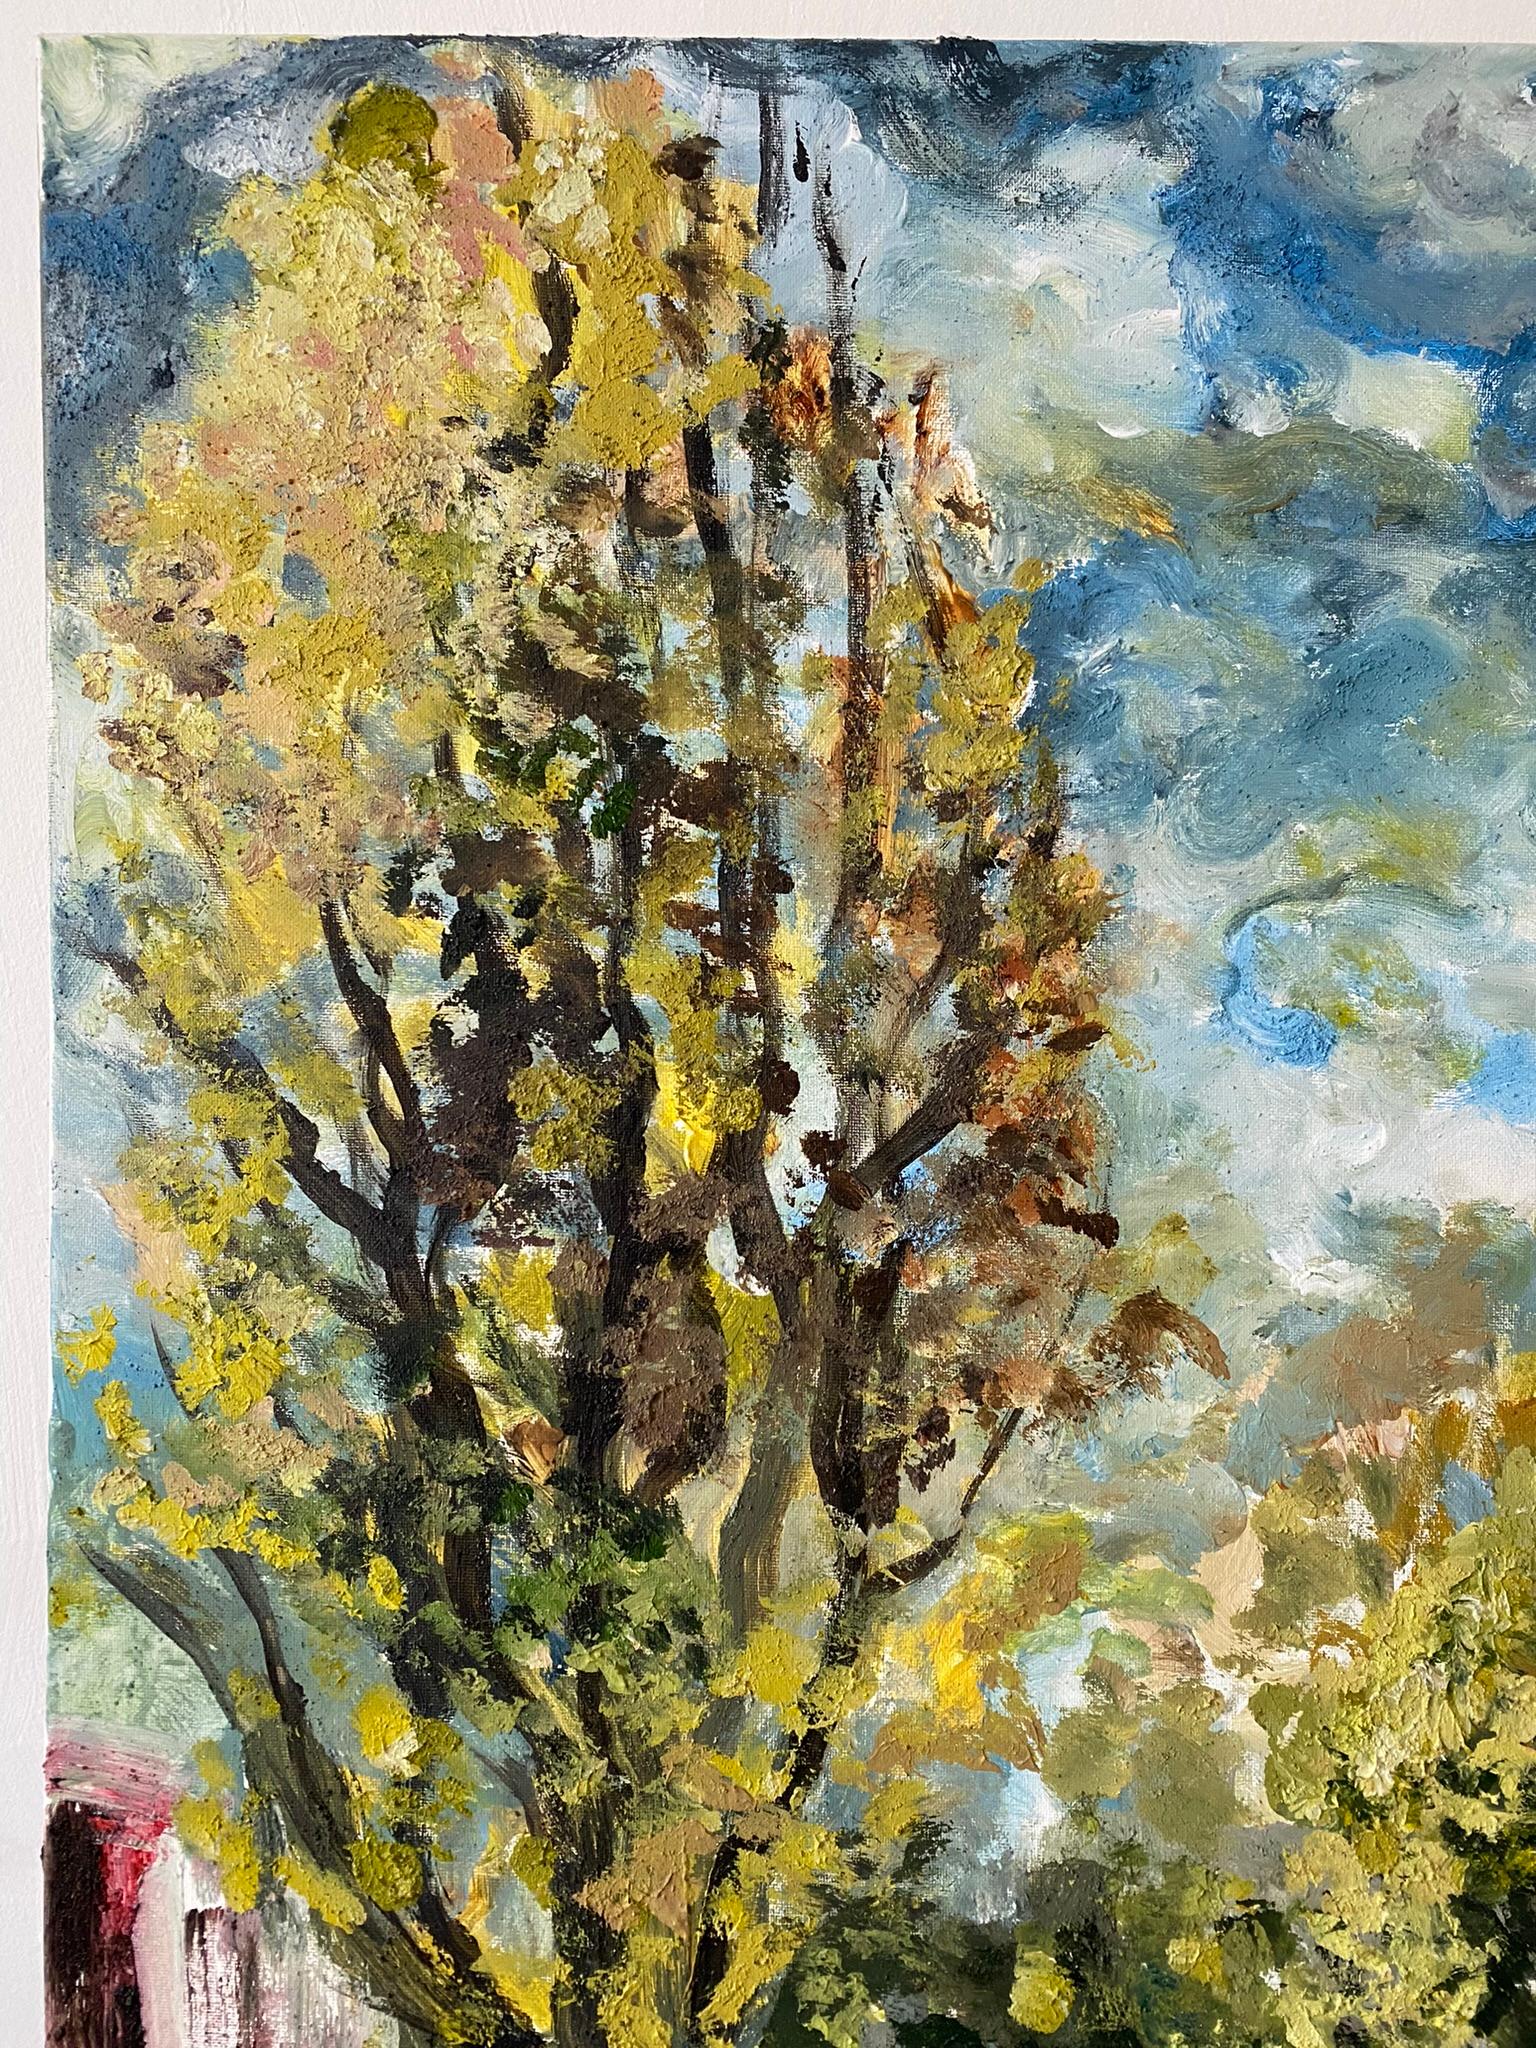 We offer Artist’s lifetime Warranty for Original paintings! This painting will be fully insured during transit.

About the painting:
To document the streets they've walked and her late dog's favourite trees, Shizico Yi embarked on a series of Plein